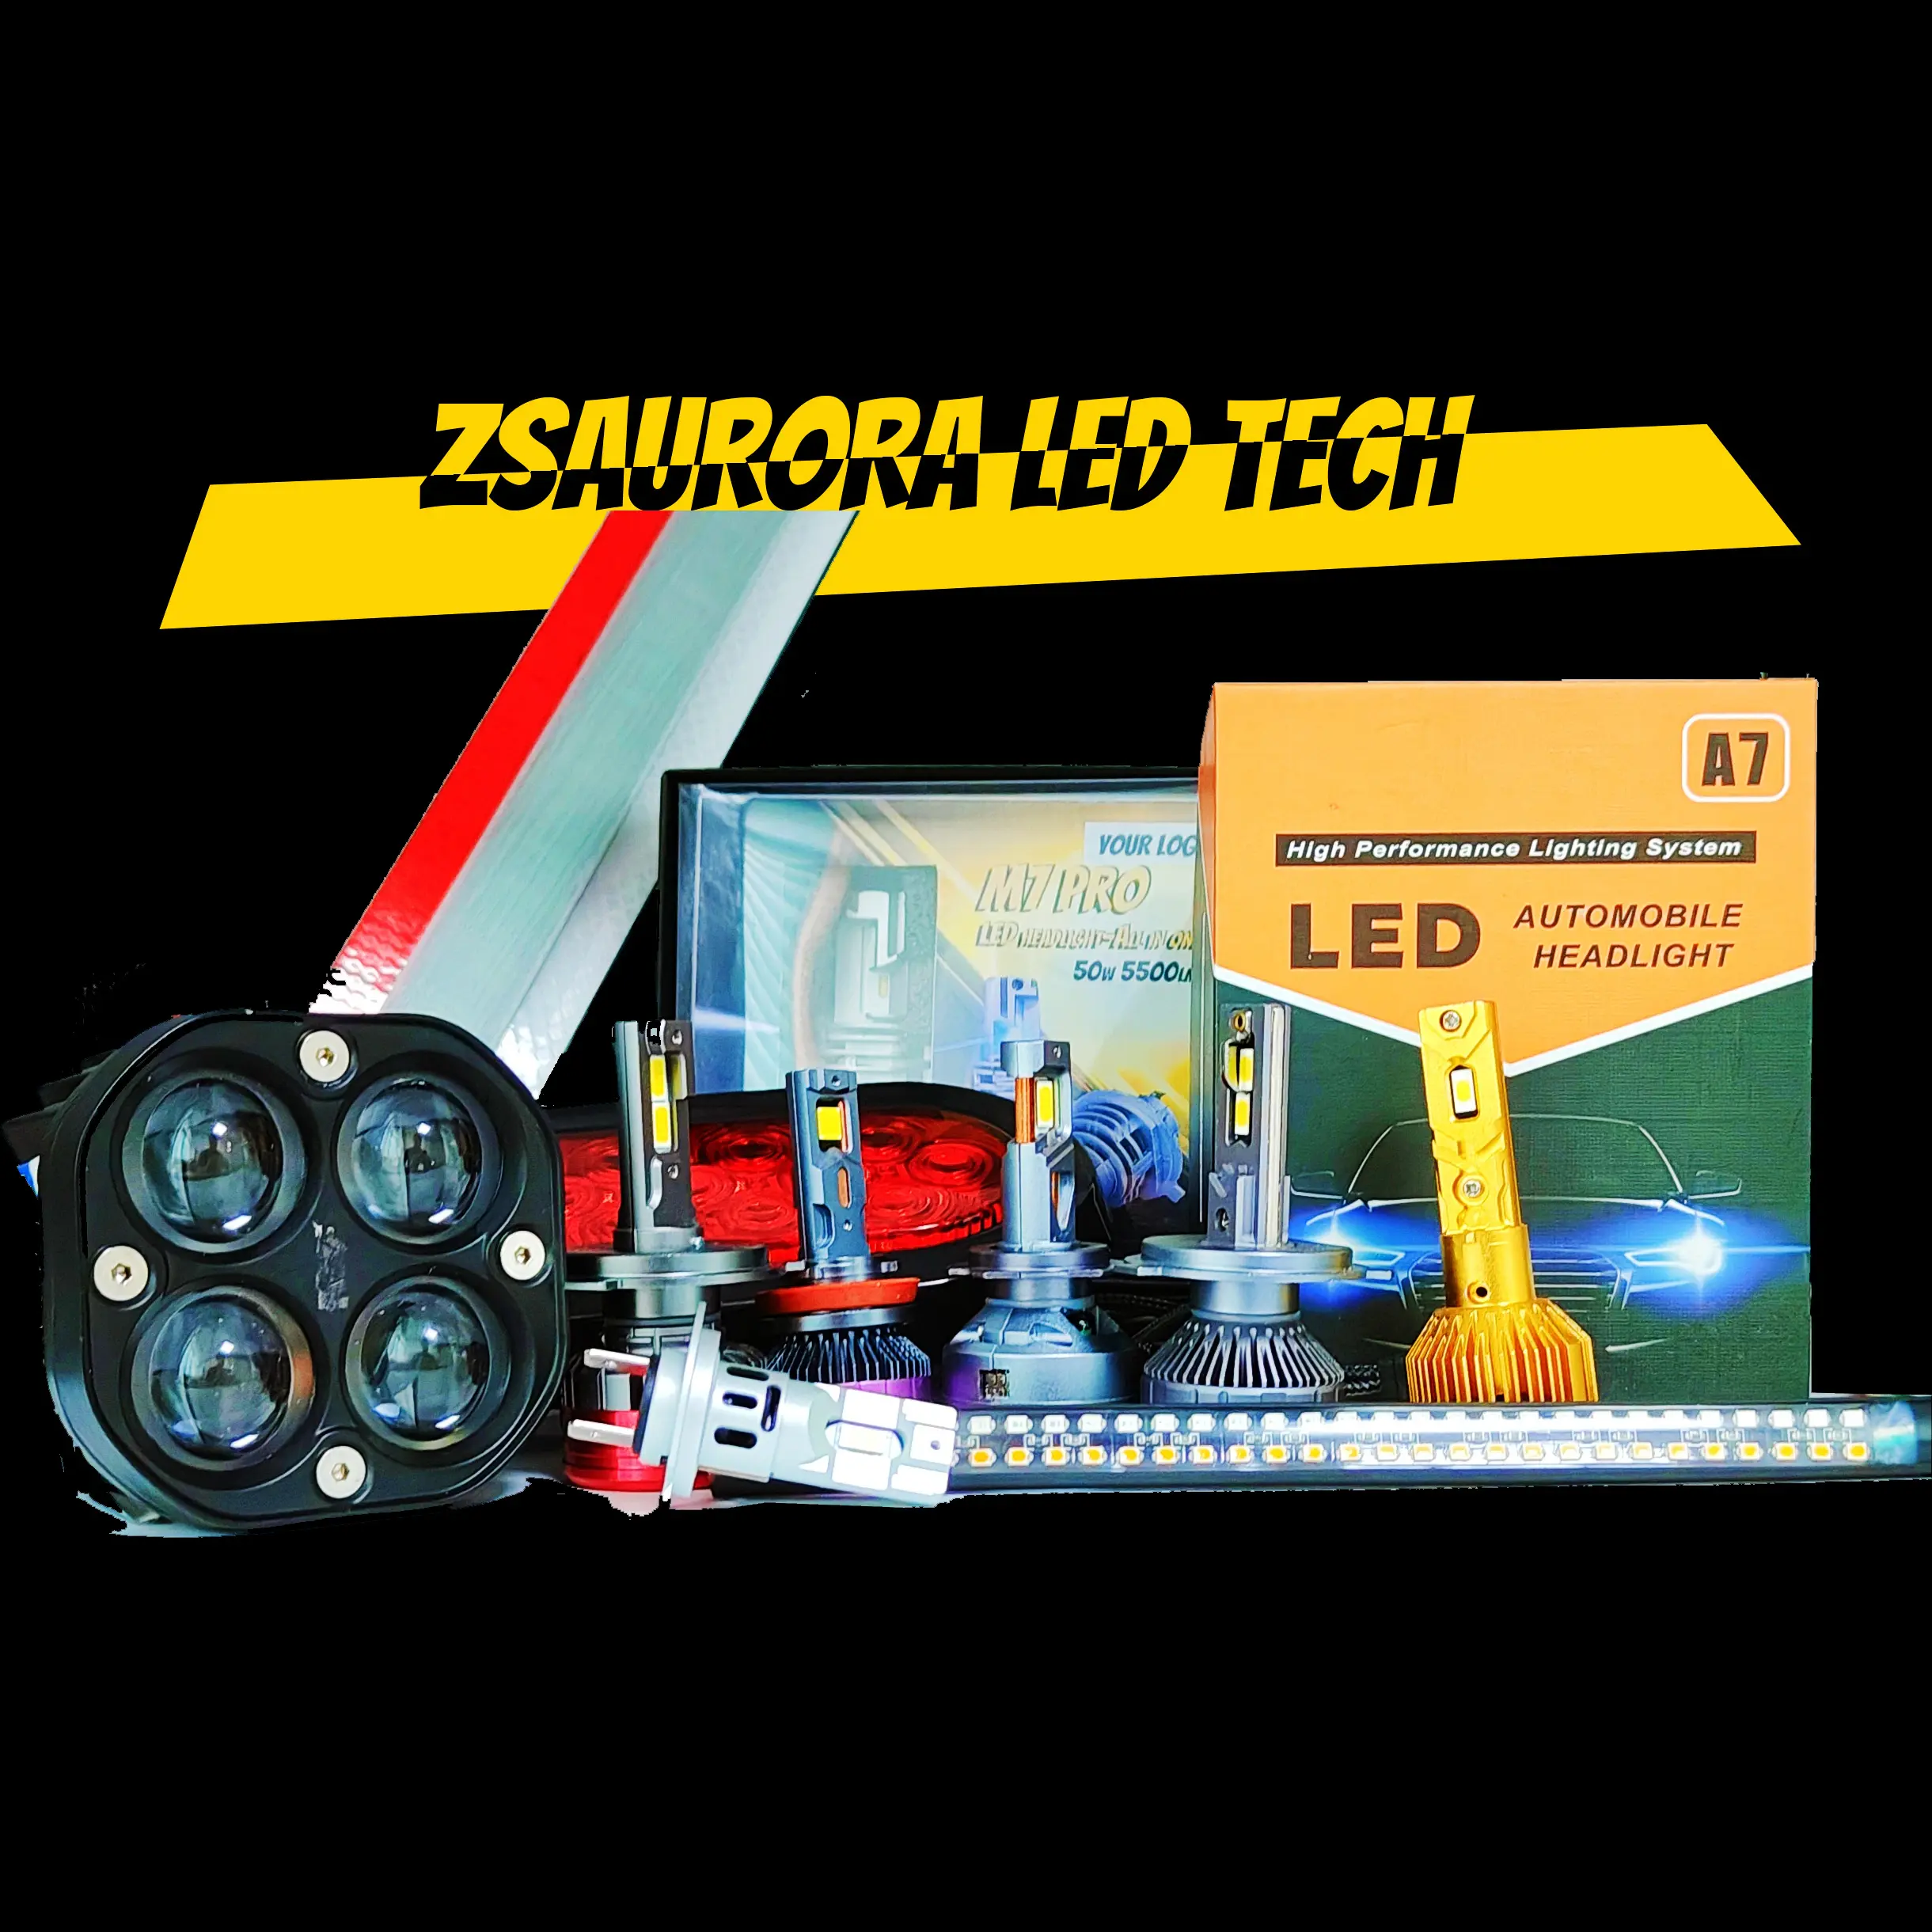 zsAURORA Max Light-320000 Waterproof LED Headlight Durable H11 H1 H7 H9 H8 9005 HB3 9006 HB4 Bulbs for Cars New Condition